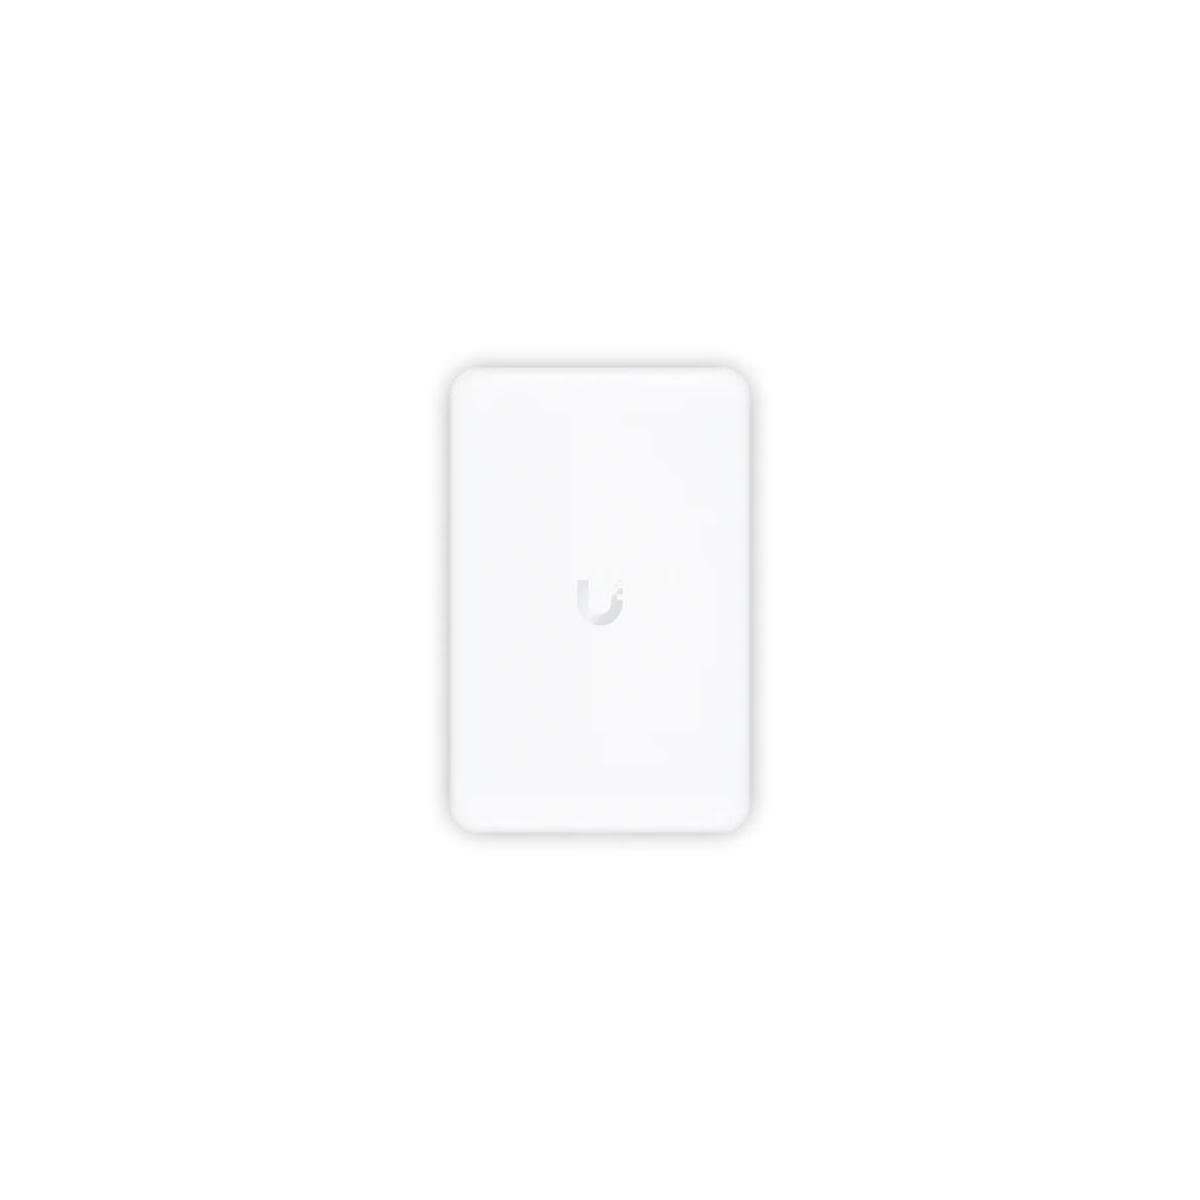 WLAN-Antenne WiFiMan-Assistent Networks Ubiquiti